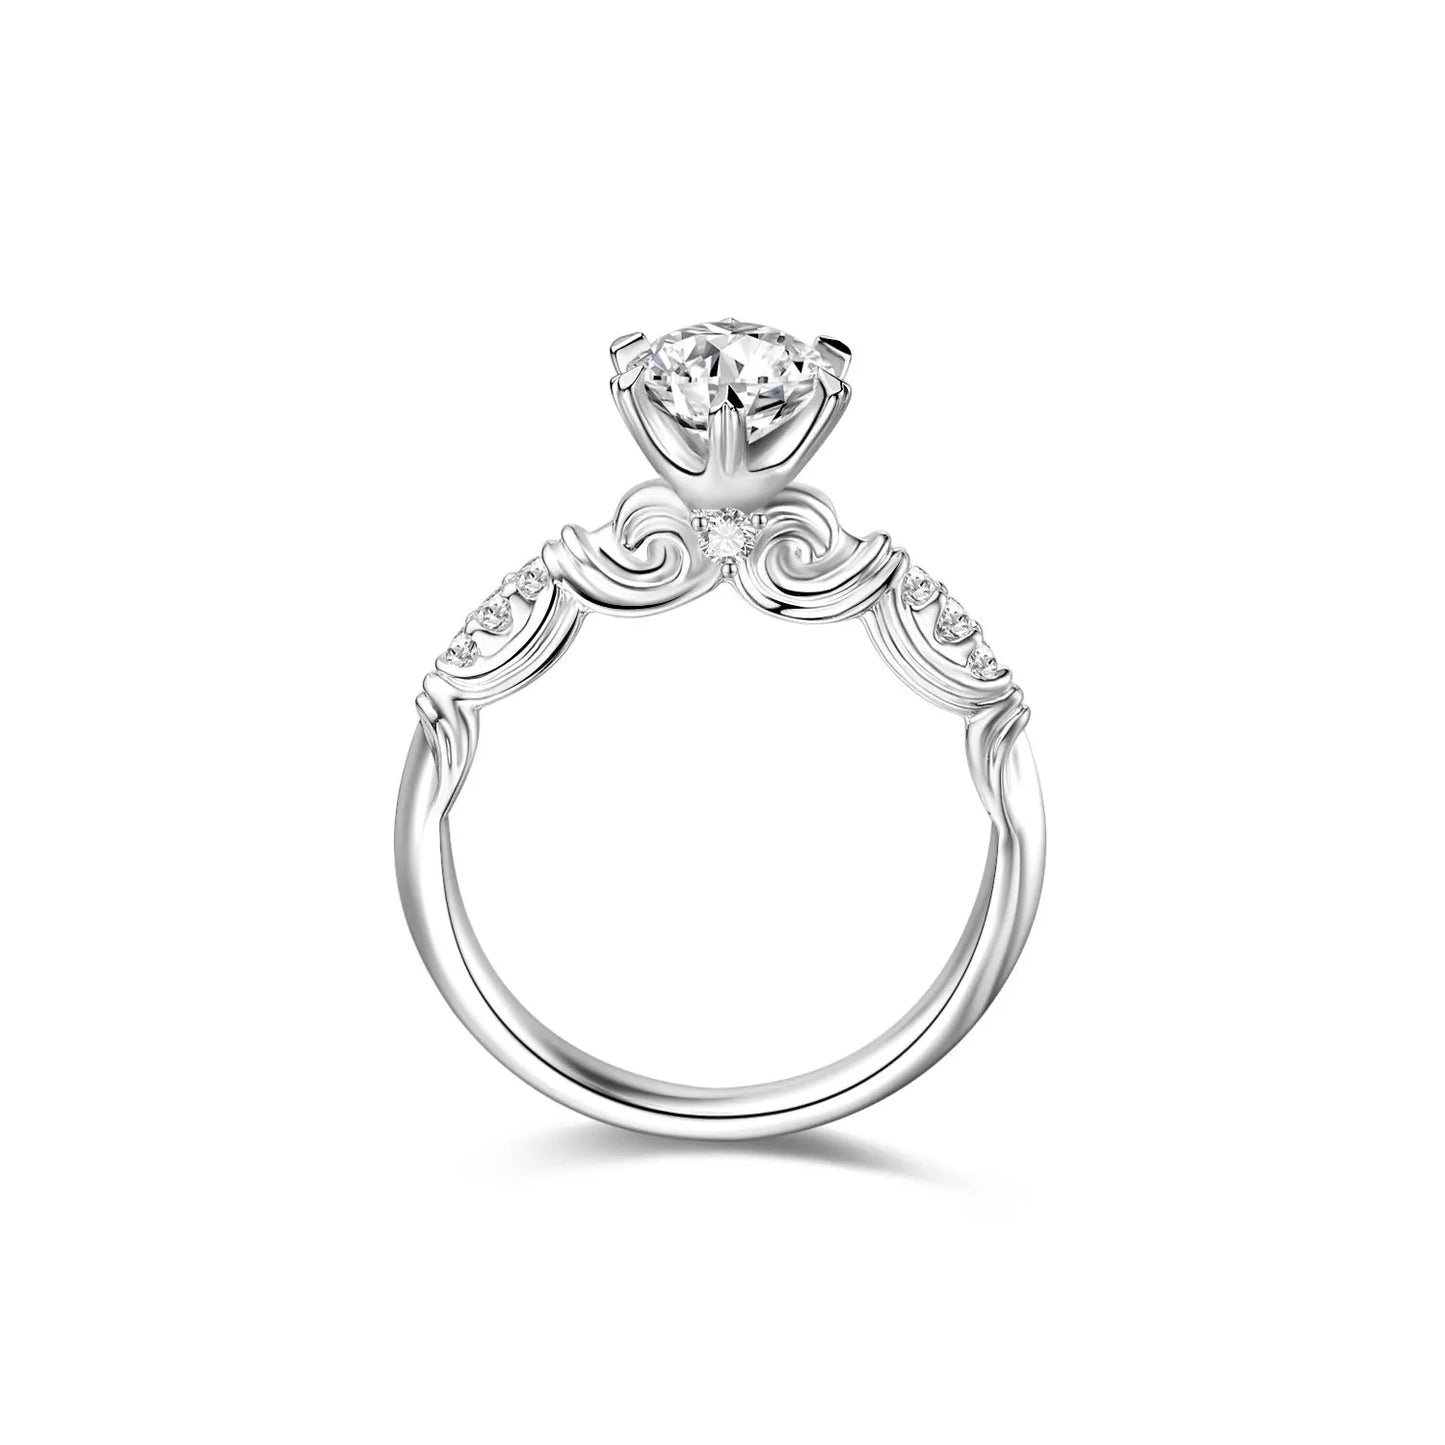 1.2-2.4ct Round Cut VVS1 Diamond in 18K Solid White Gold